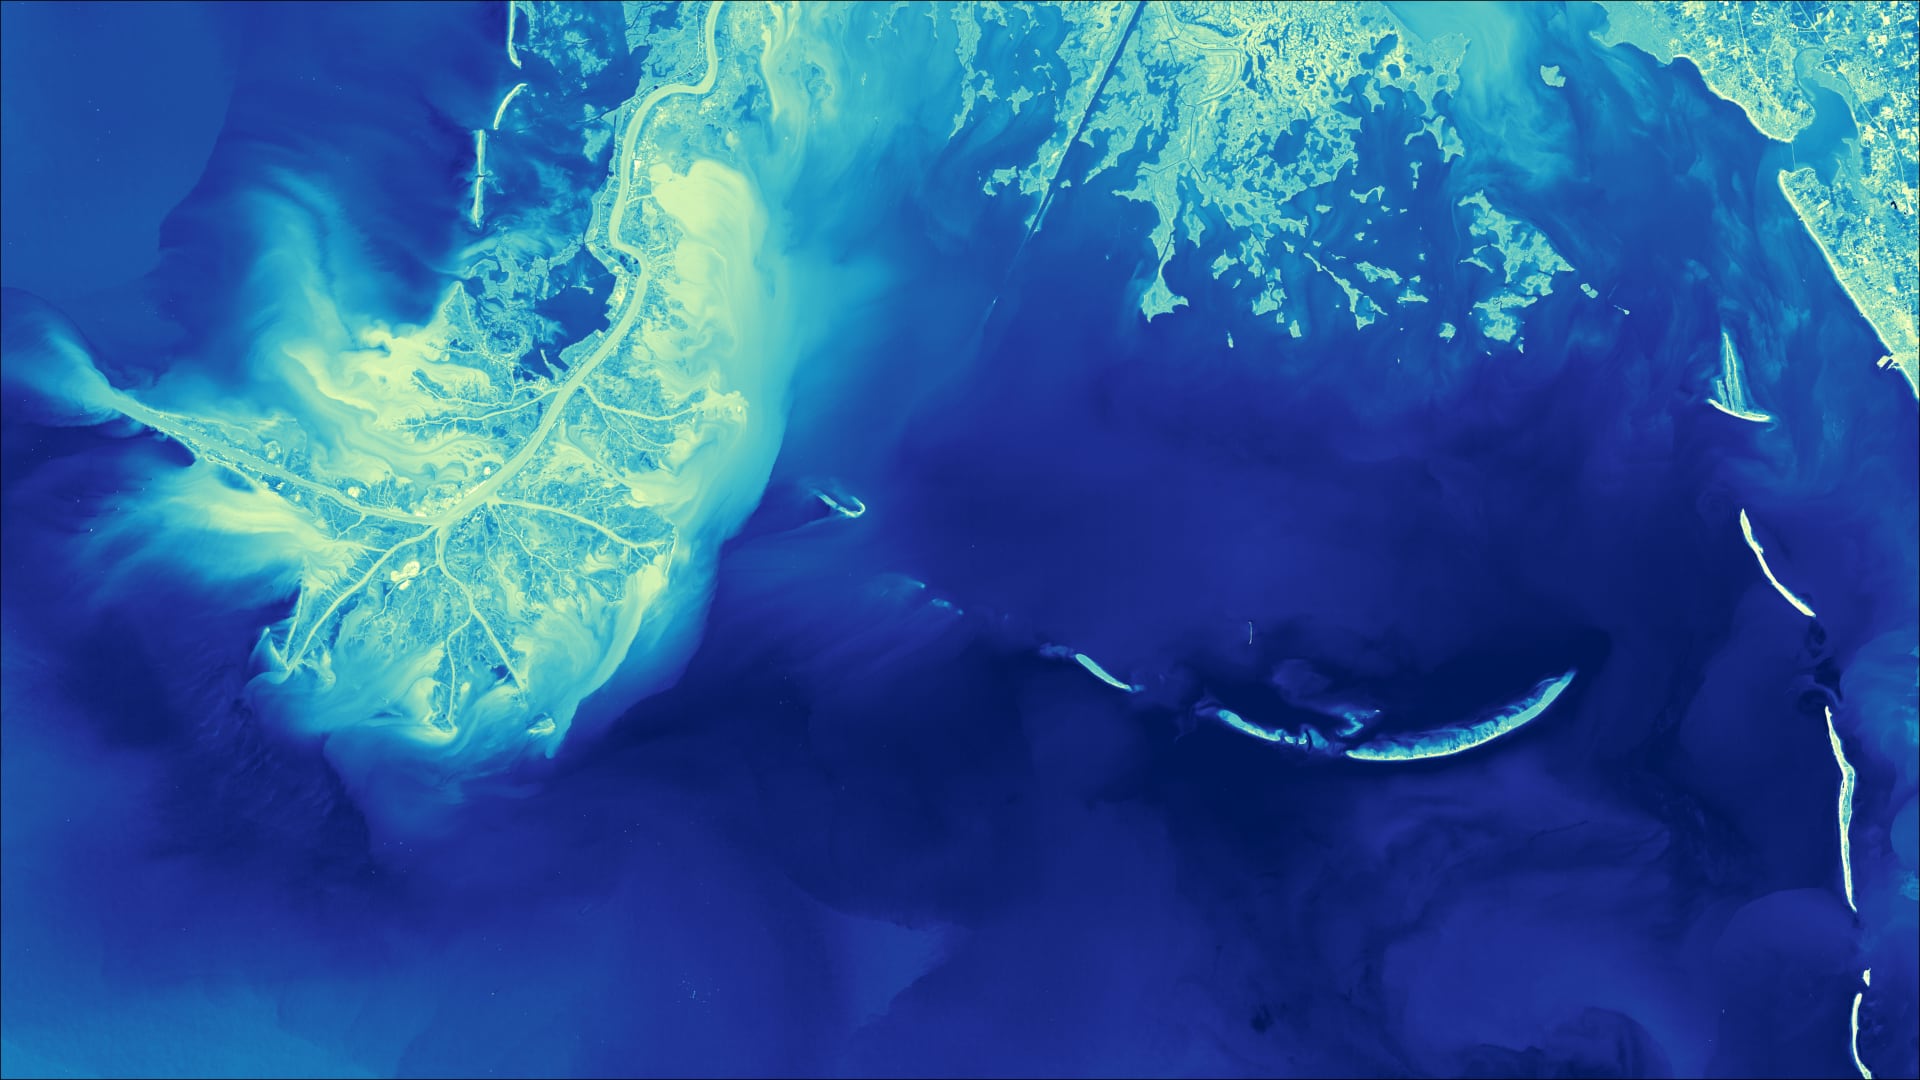 Turbidity processed imagery using 2020 Landsat 8 OLI/TIRS data. The Chandeleur Islands located on the southeastern coast of Louisiana are displayed. Shades of yellow indicate areas with high turbidity and darker shades of blue indicate areas with low turbidity. Concentrating on areas with higher turbidity allows the coastal restoration experts to know where land erosion occurs and identify ideal areas for seagrass revegetation.  Keywords: Water Resources, Turbidity, Seagrass, Breton National Wildlife Refuge (BNWR), Chandeleur Islands, Louisiana